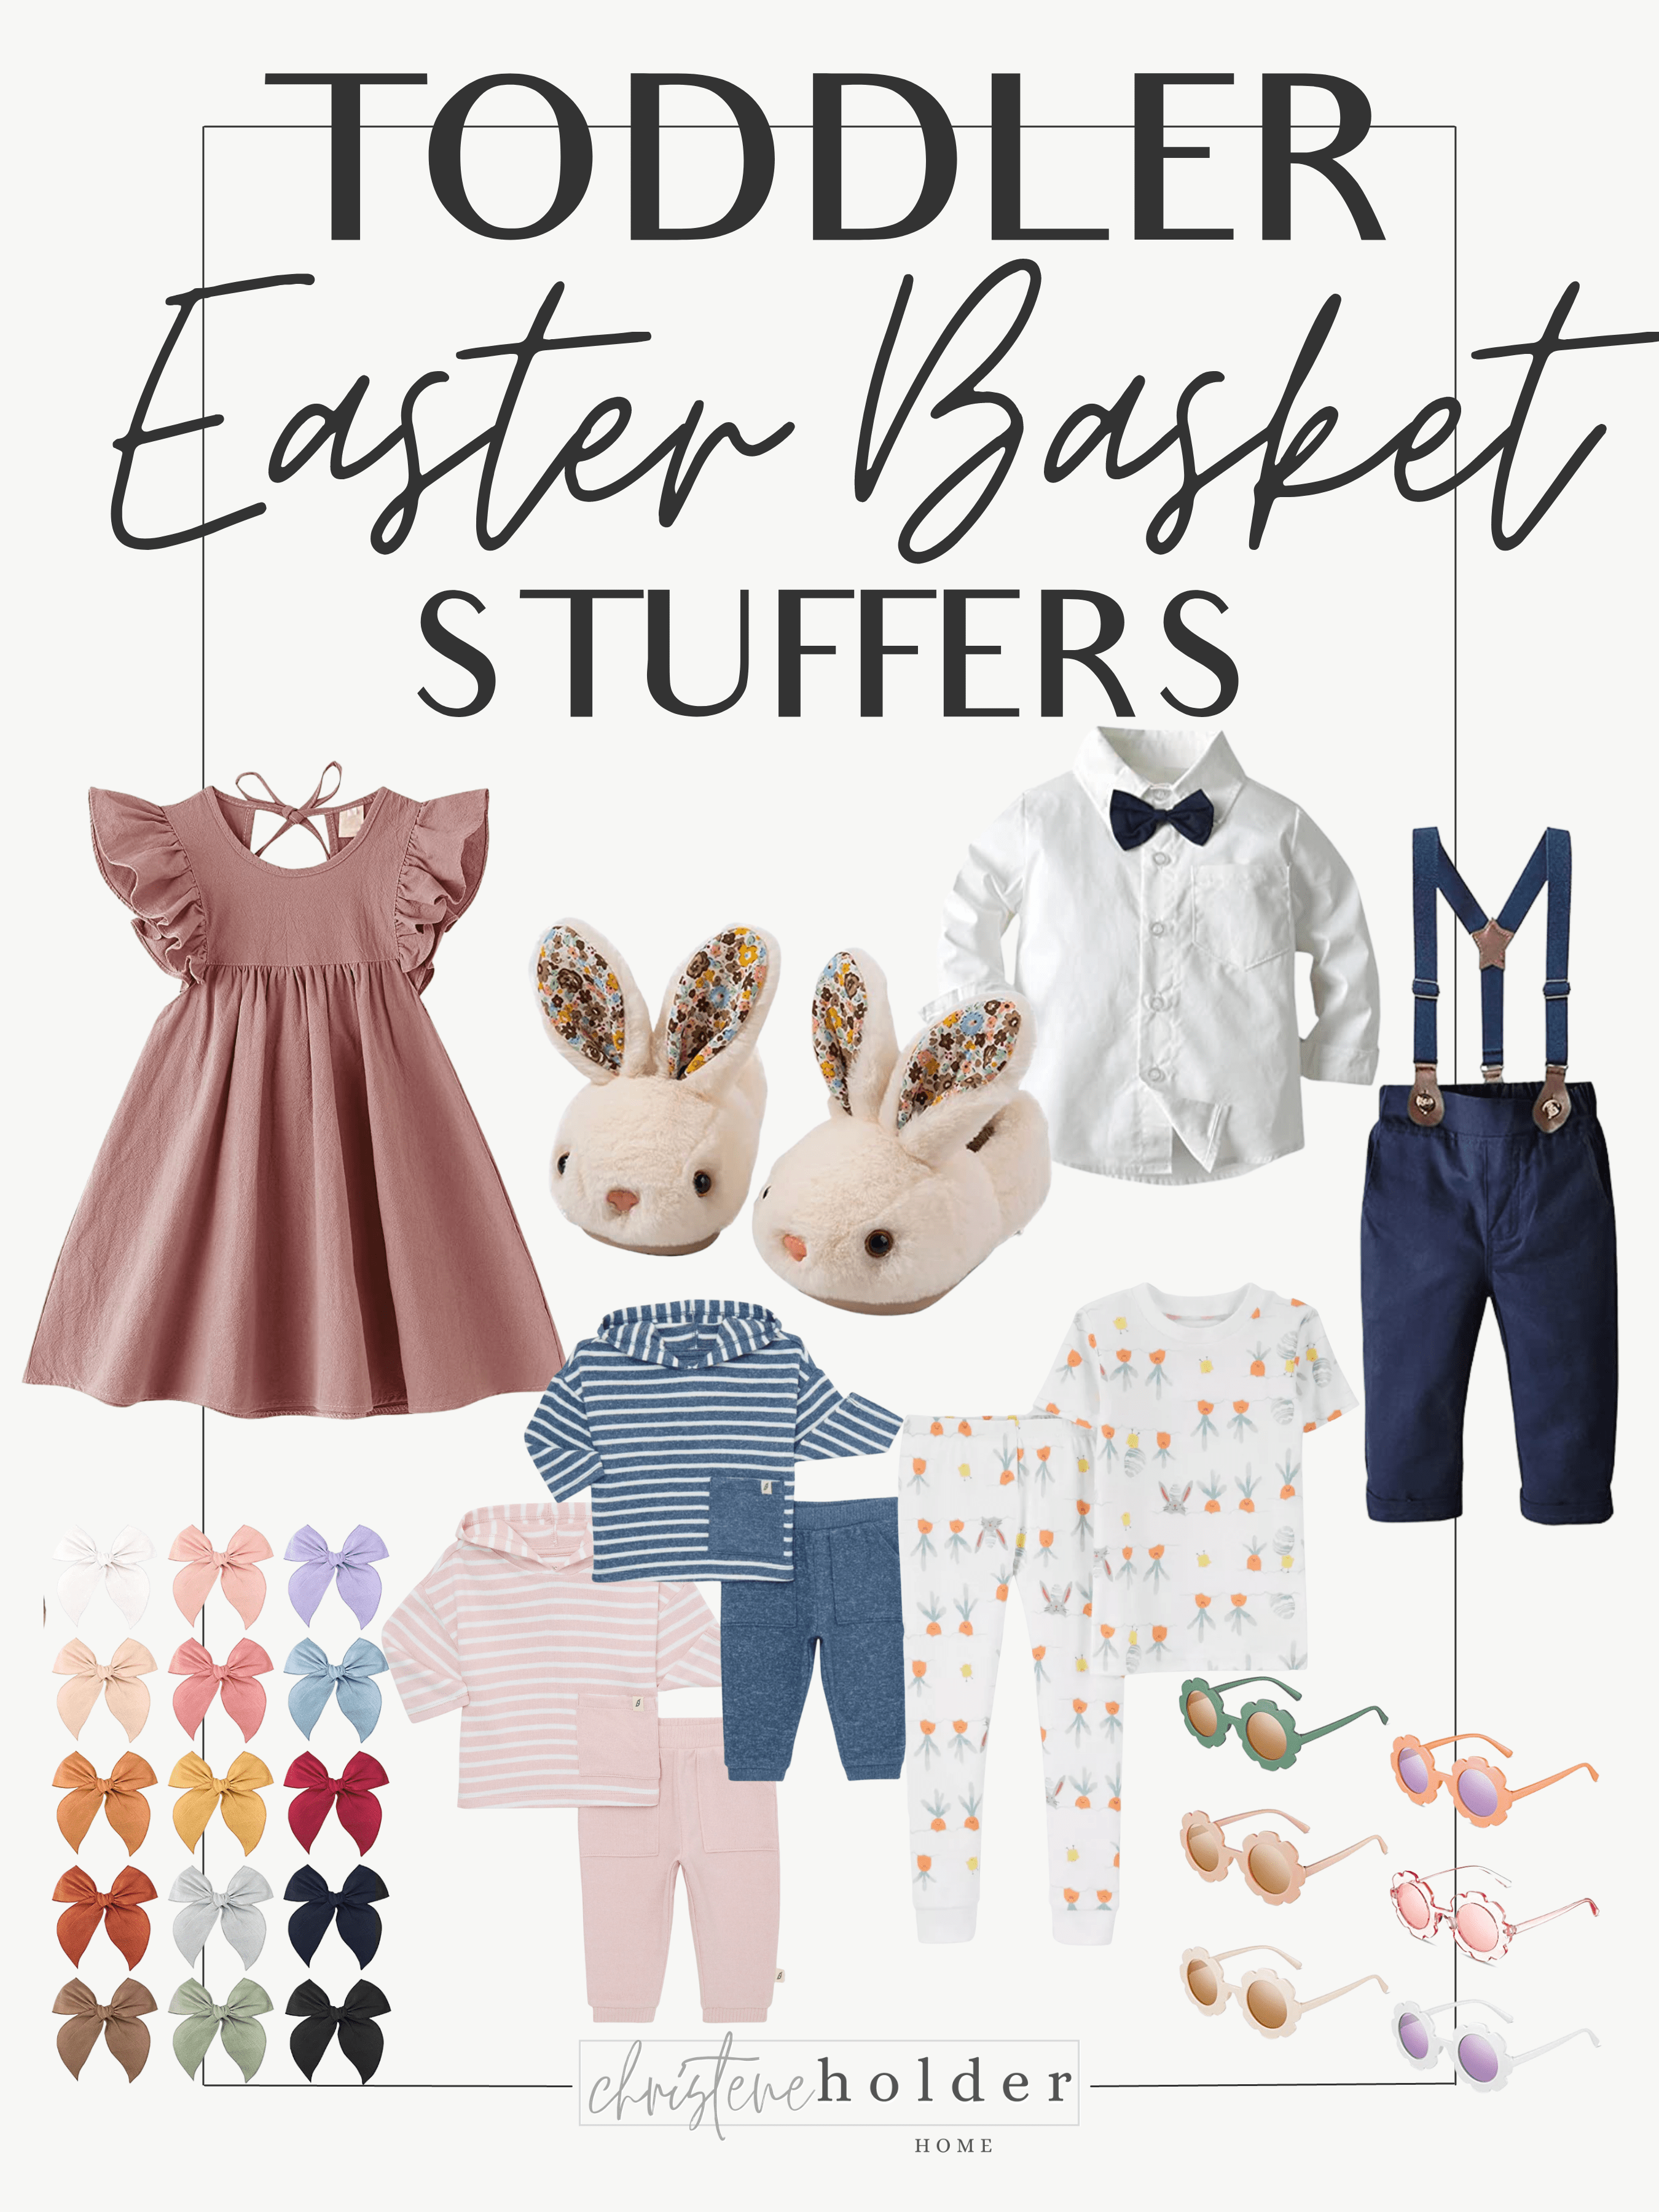 toddler Easter basket clothes and accessories stuffer ideas